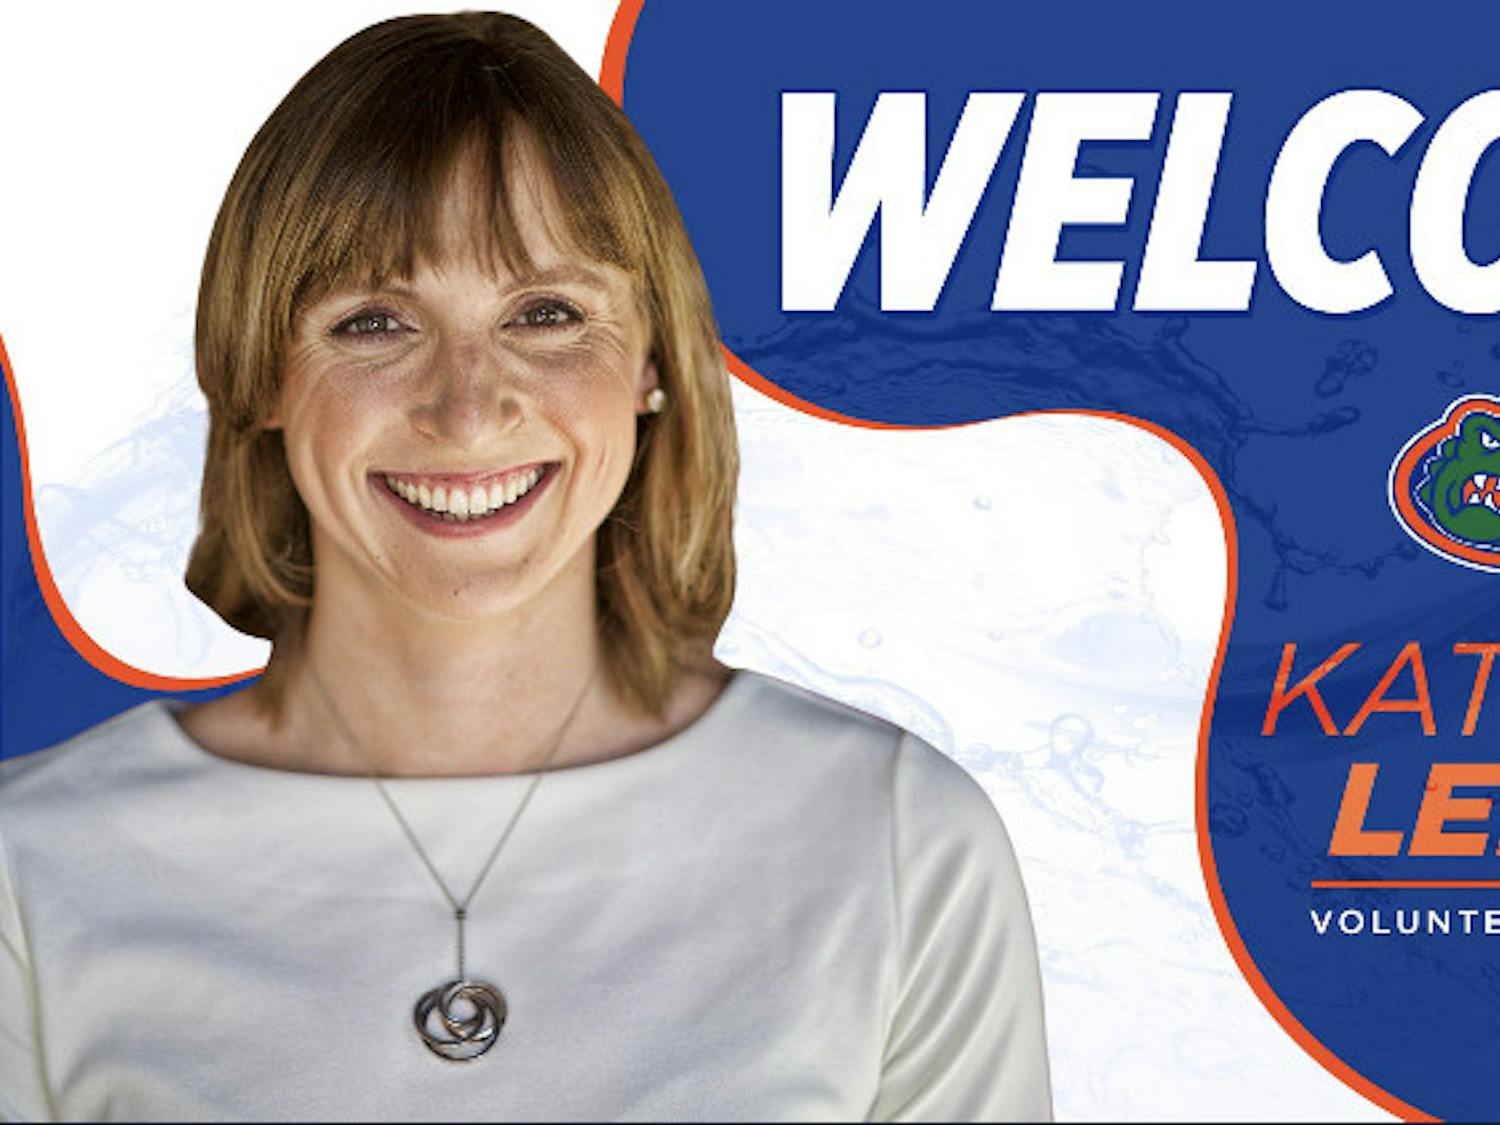 Swimming legend Katie Ledecky announced Wednesday she'd join UF's program as a volunteer swimming coach.